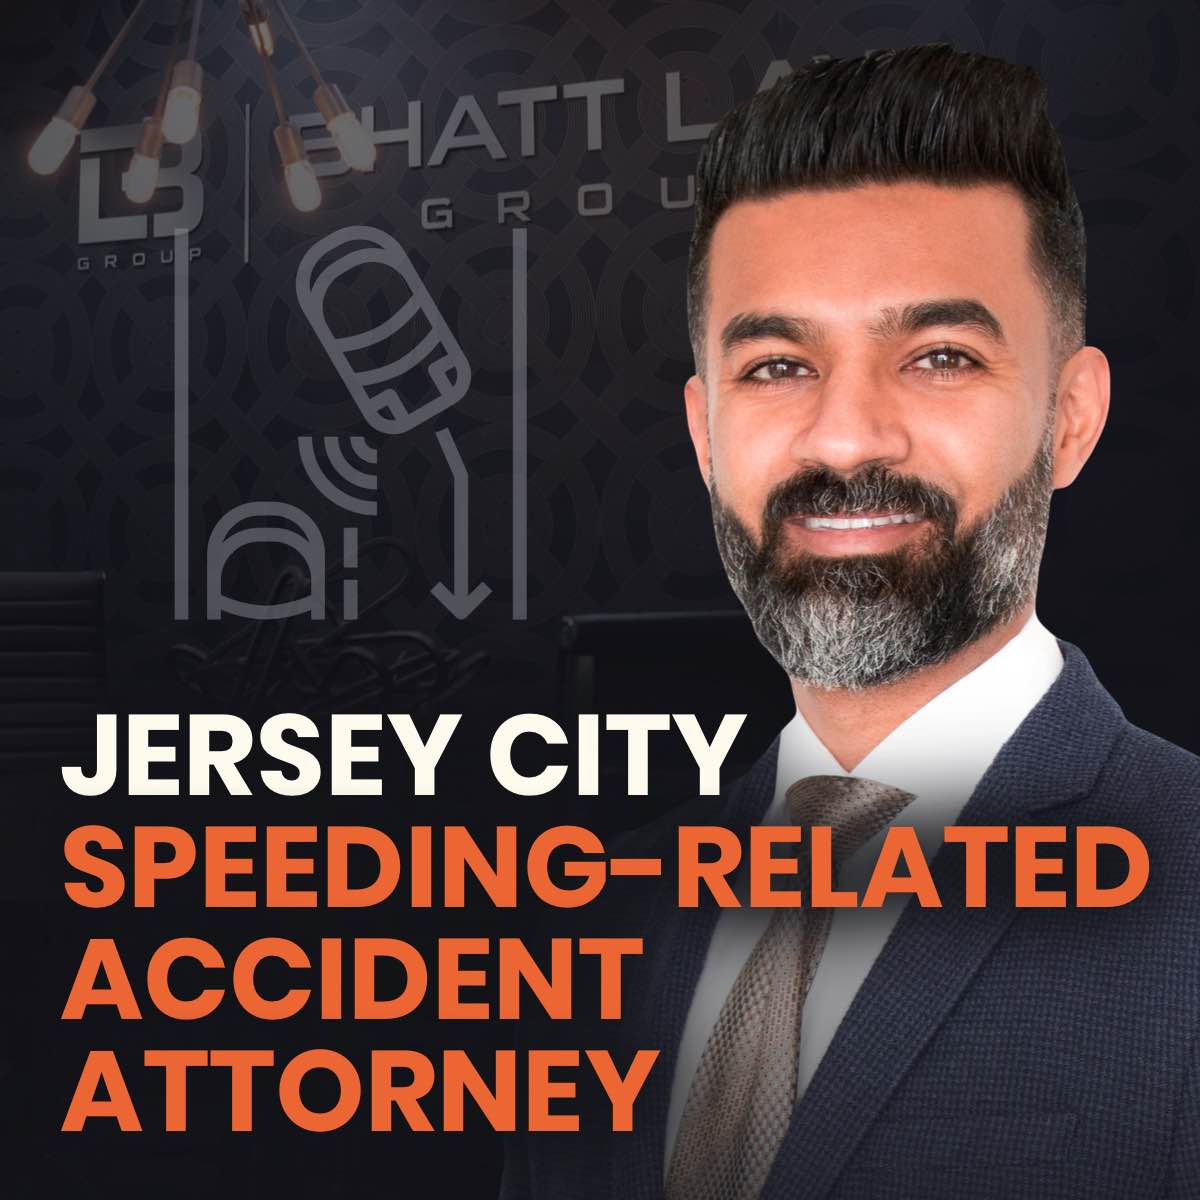 Jersey City Speeding-Related Accident Attorney